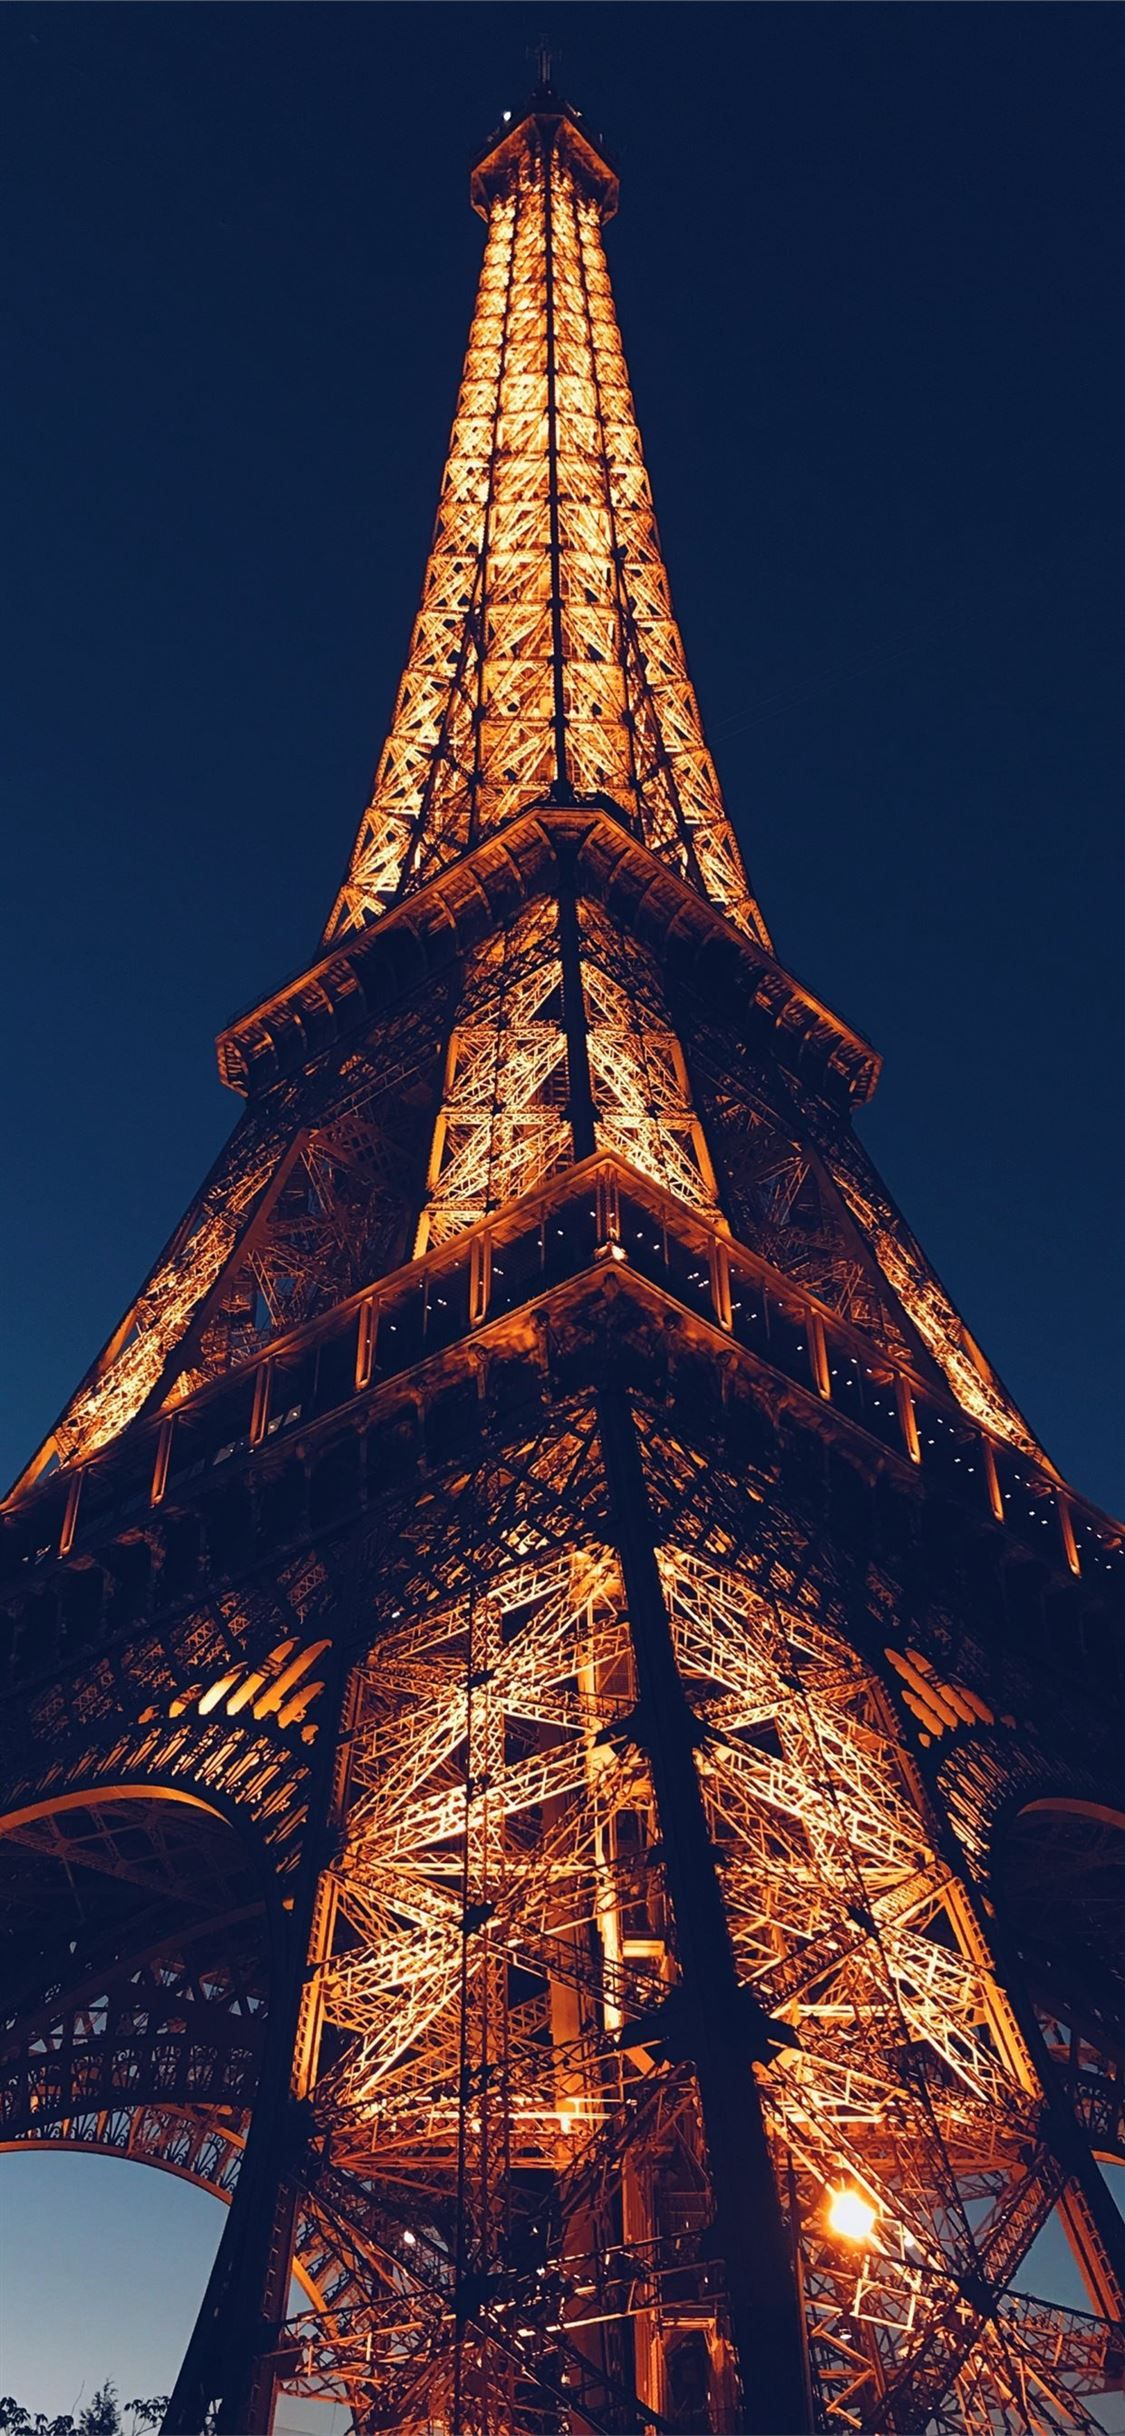 The eiffel tower is lit up at night - Eiffel Tower, architecture